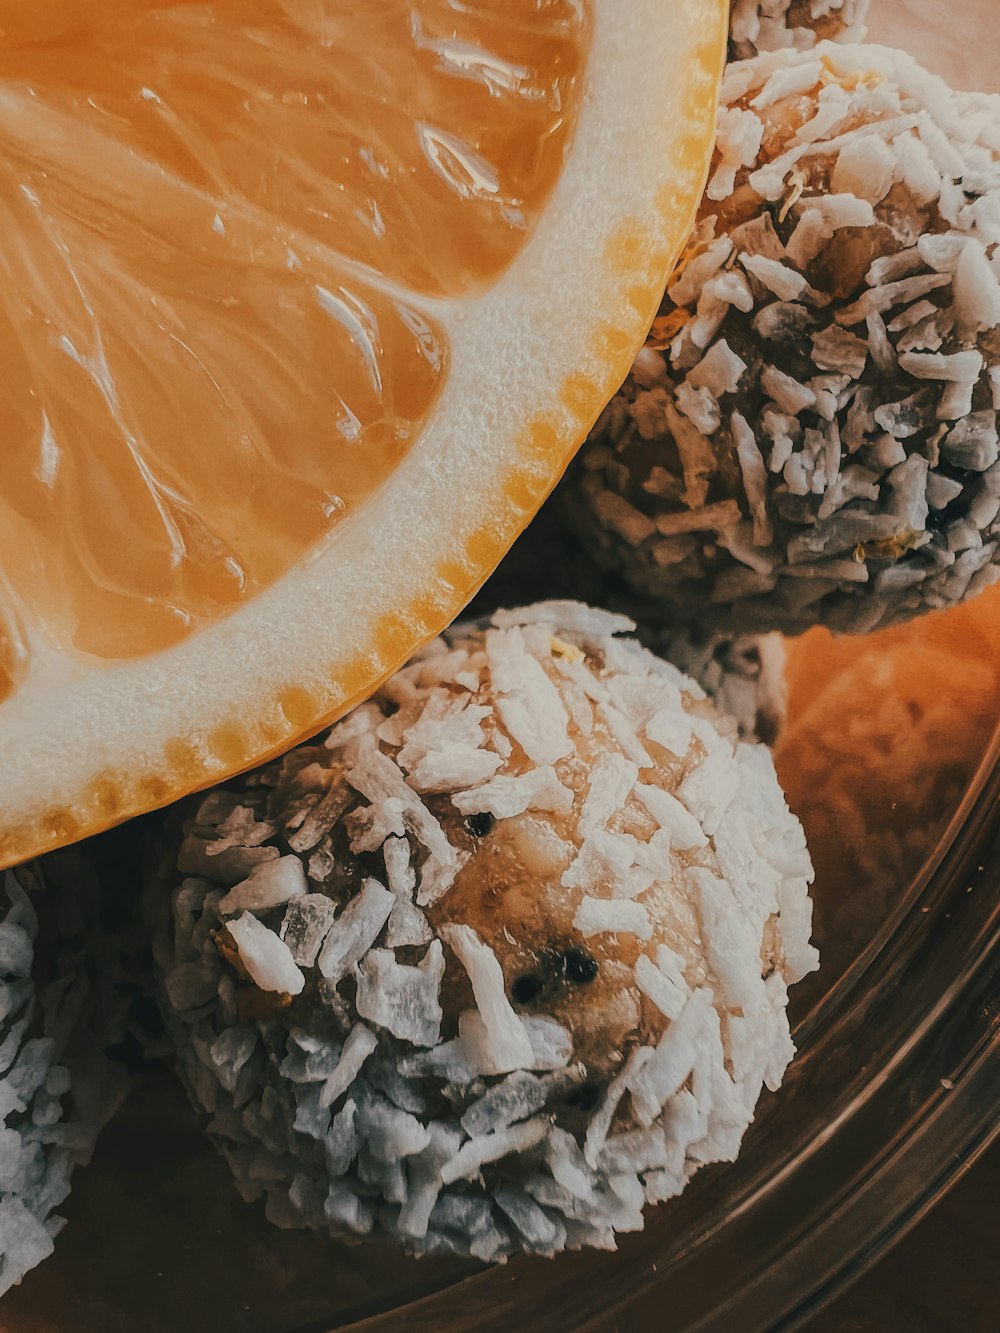 a close up of a plate of food with an orange